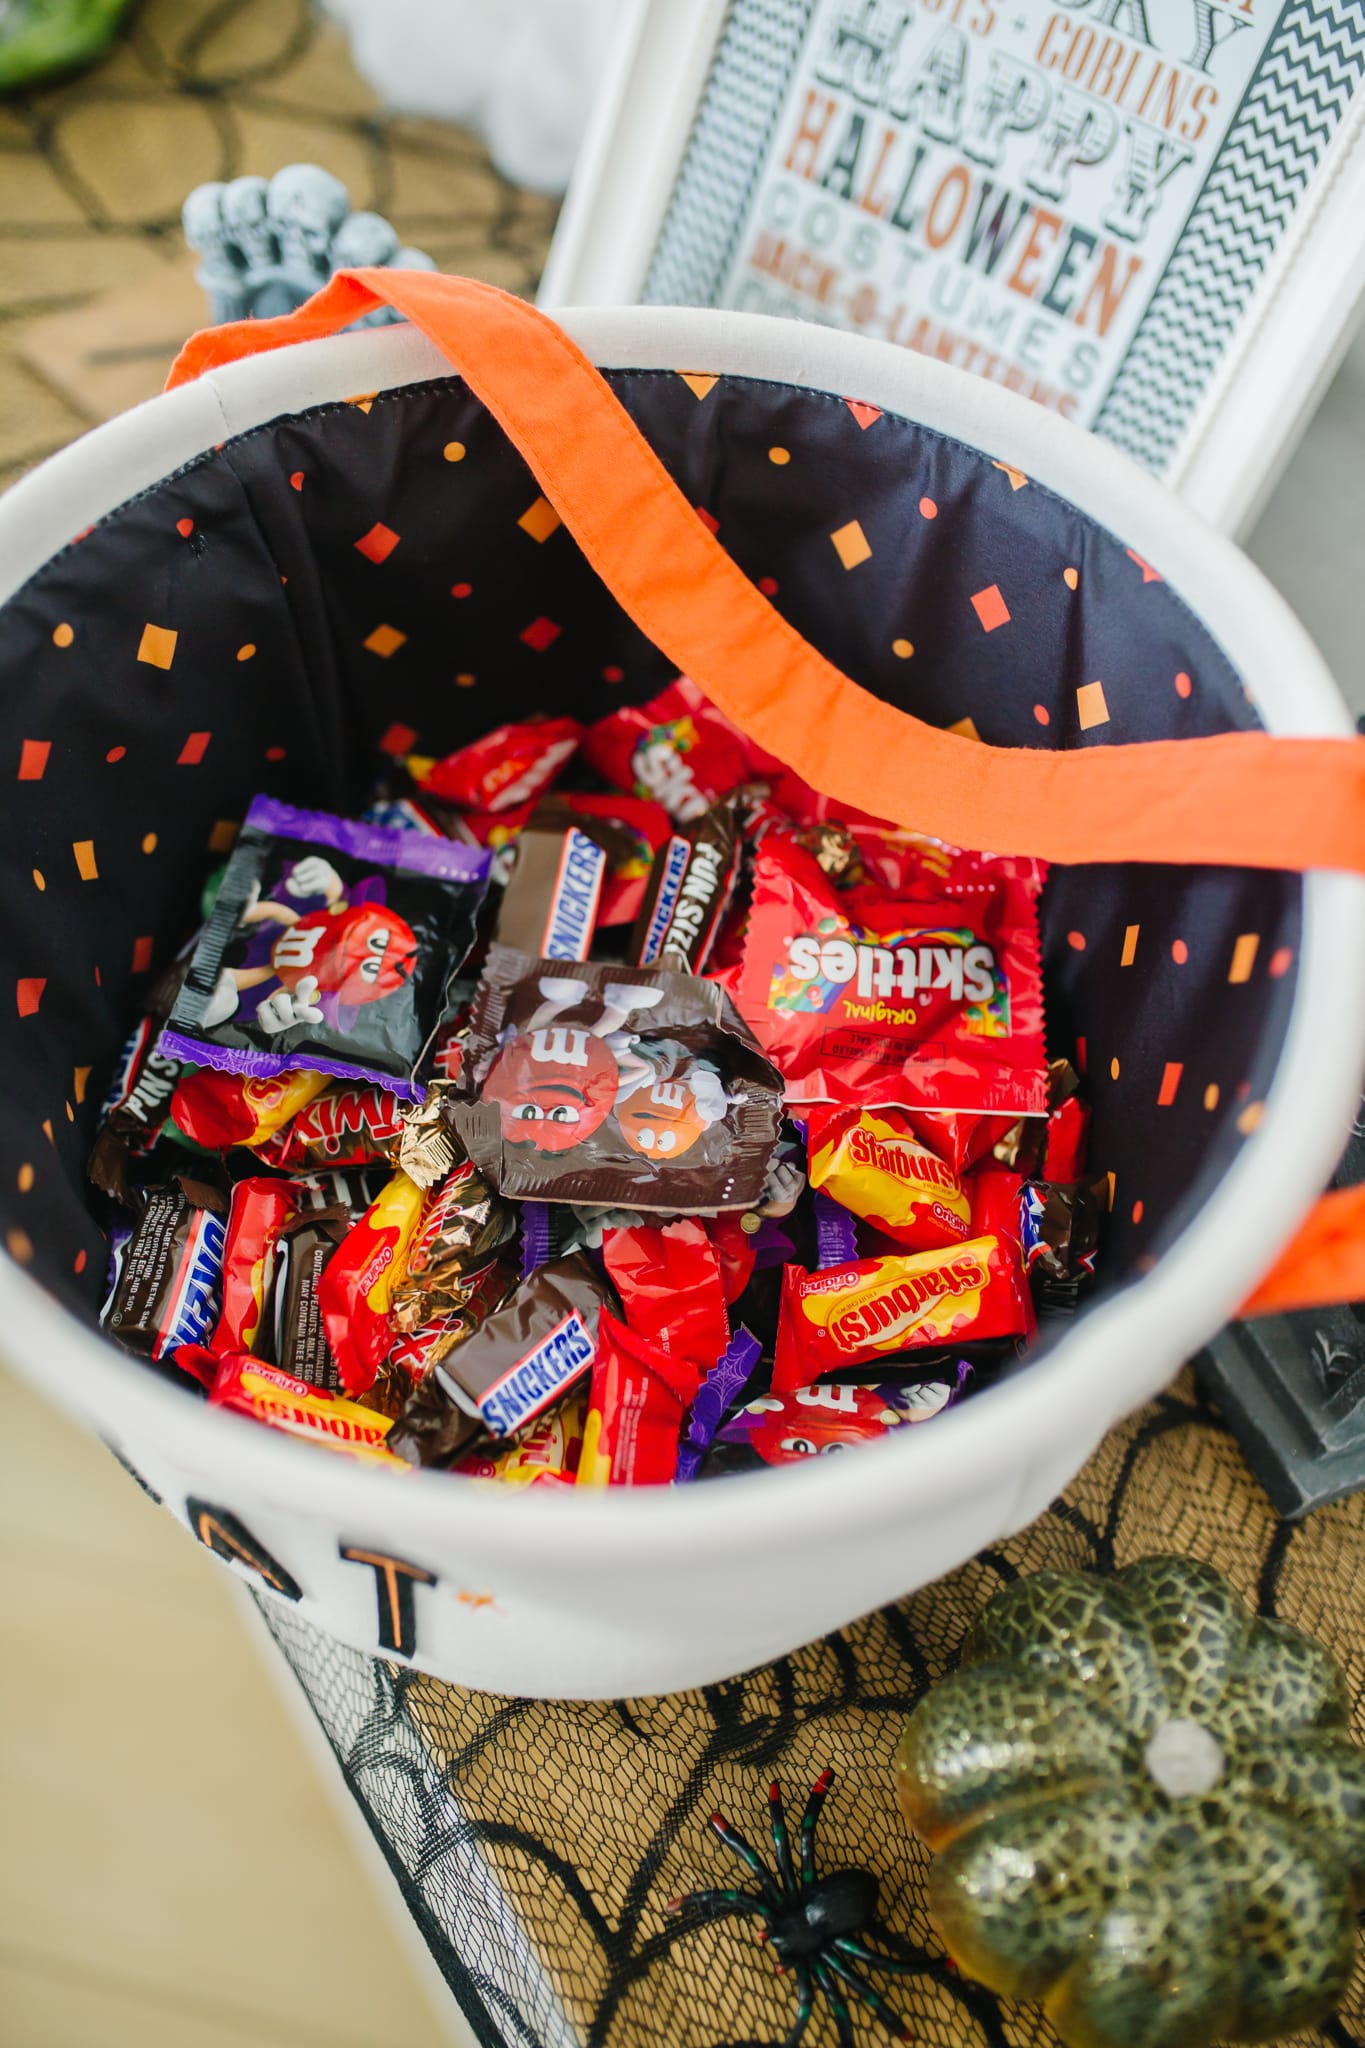 Where to Donate Halloween Candy Friday We're In Love